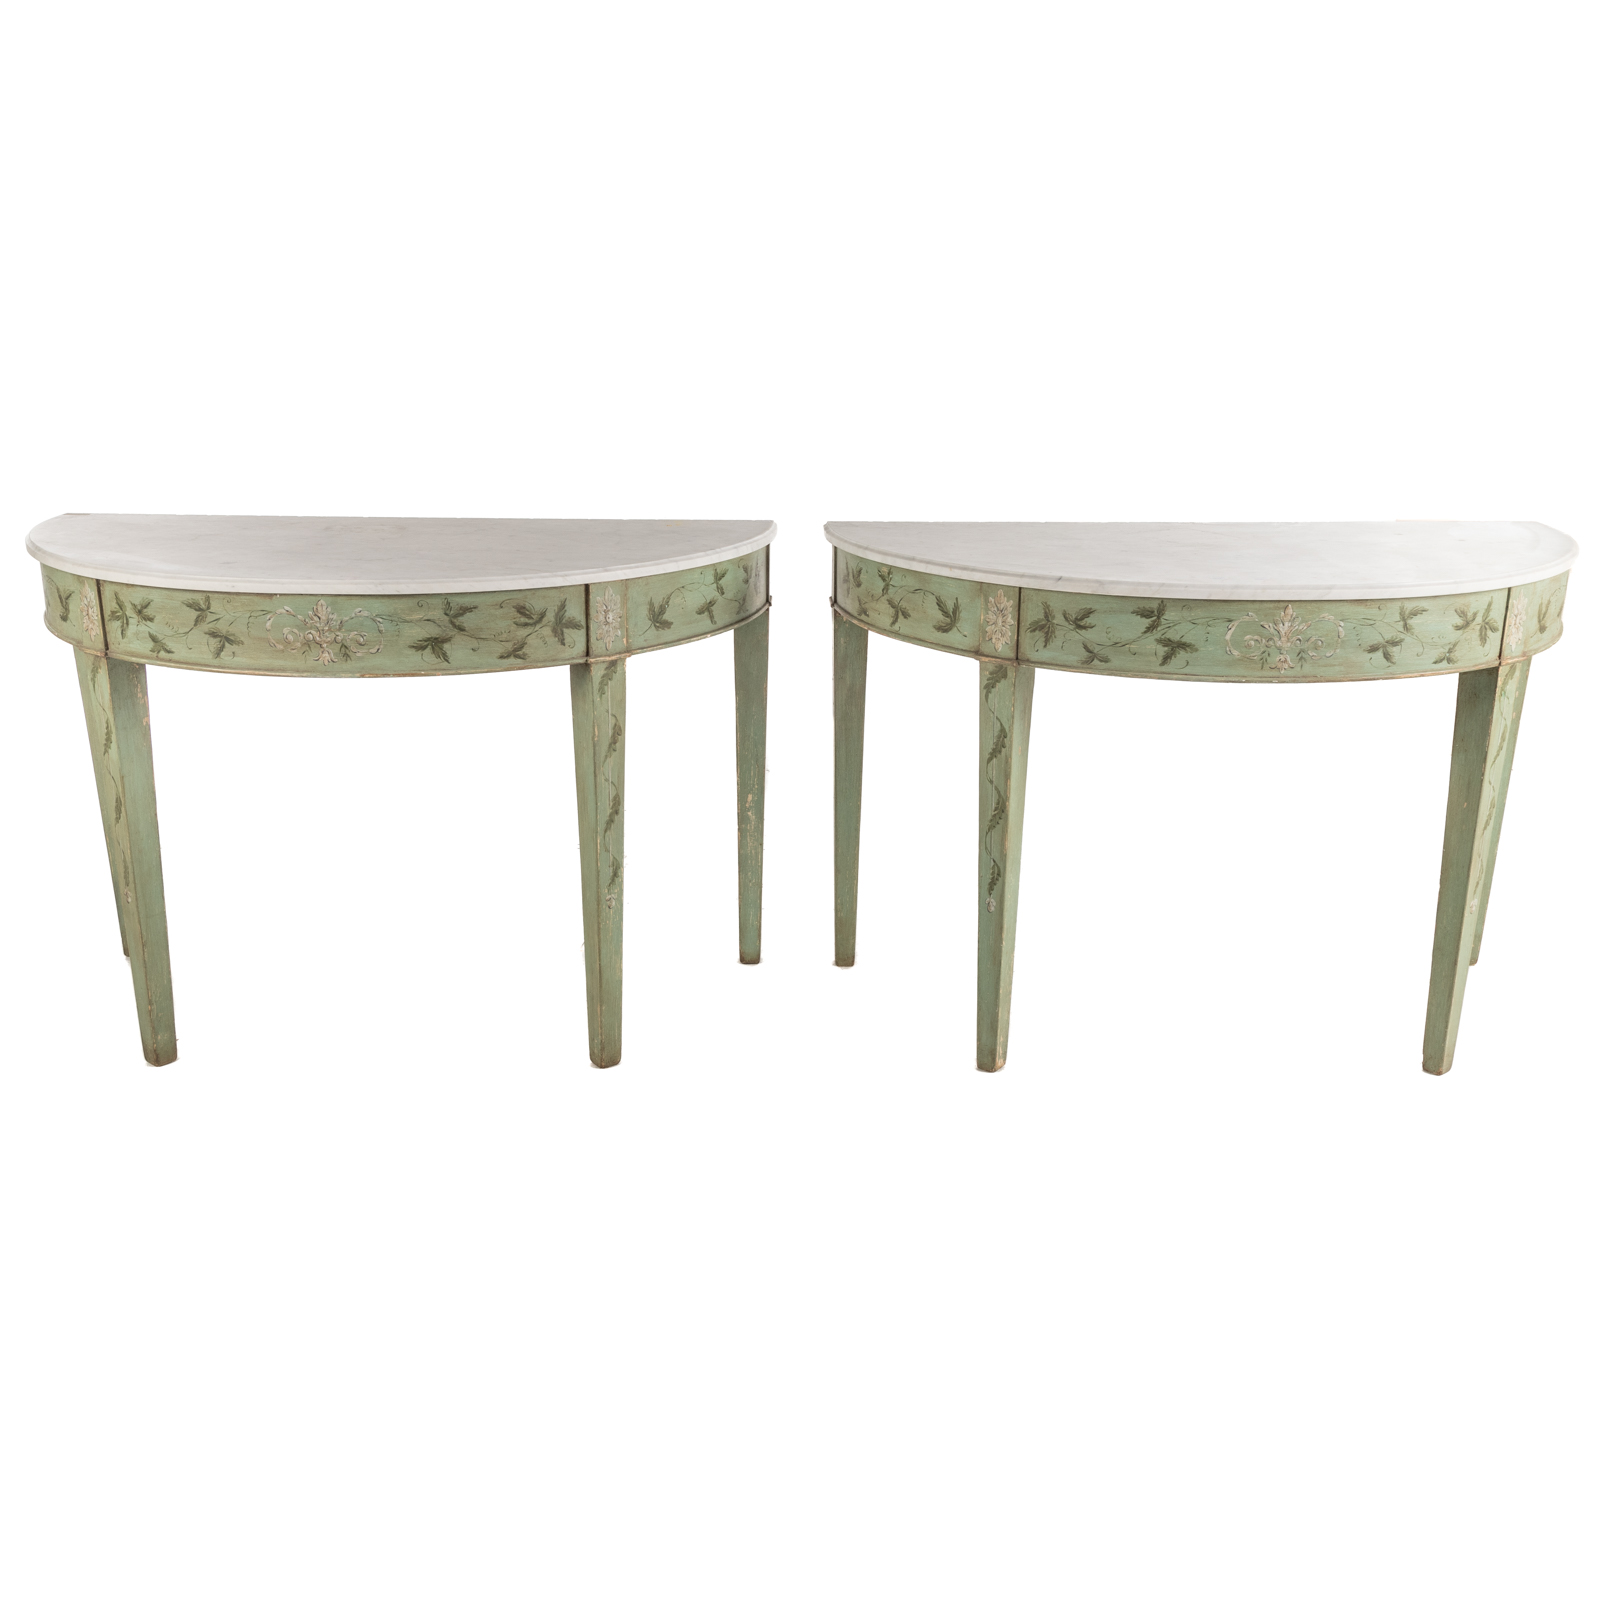 A PAIR OF MARBLE TOP DEMILUNE CONSOLES 3b296c